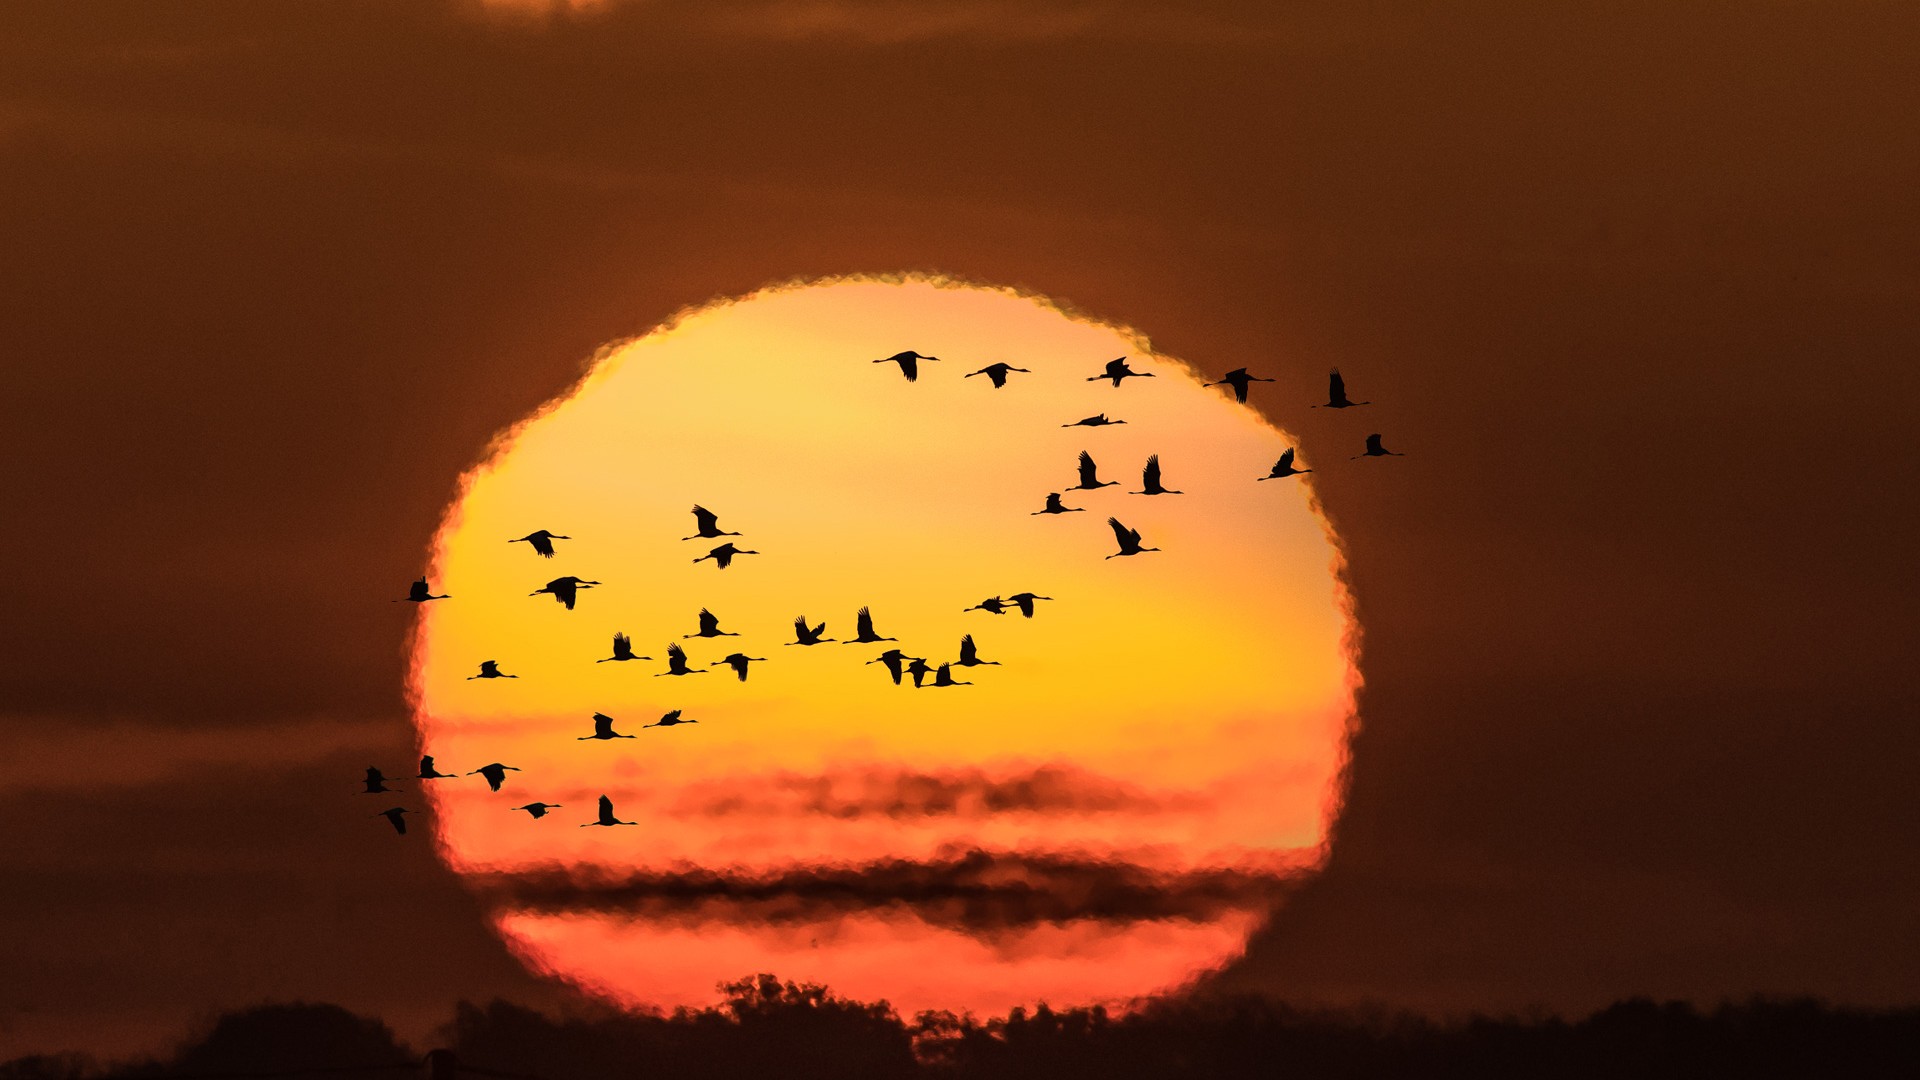 General 1920x1080 Sun animals birds nature sky flying silhouette